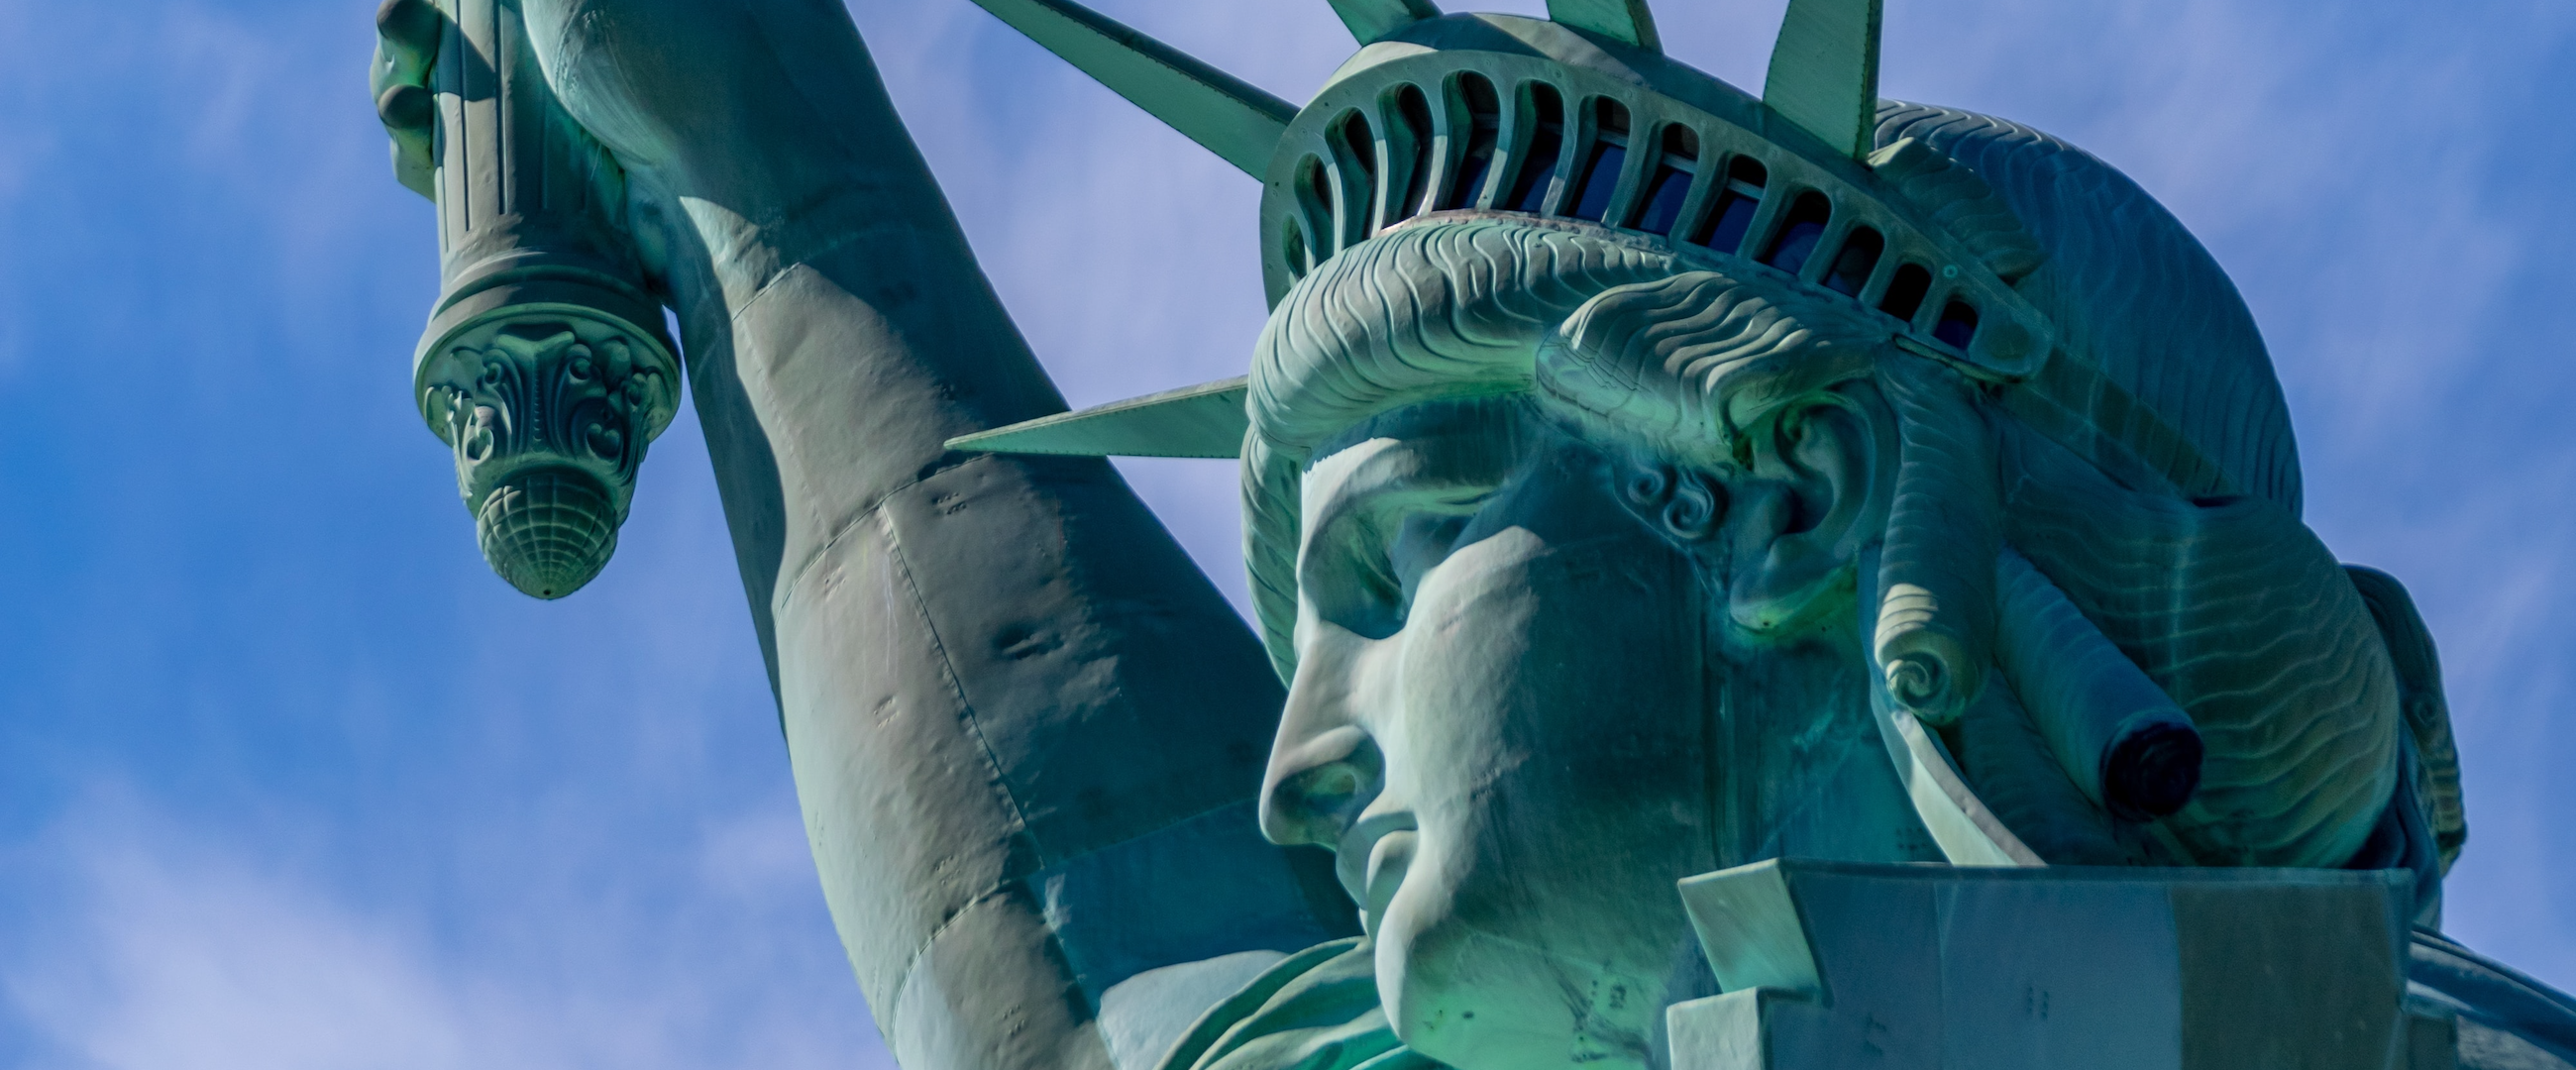 Close up of the face of the Statue of Liberty, a colossal neoclassical sculpture located on Liberty Island in New York Harbor in New York City, United States